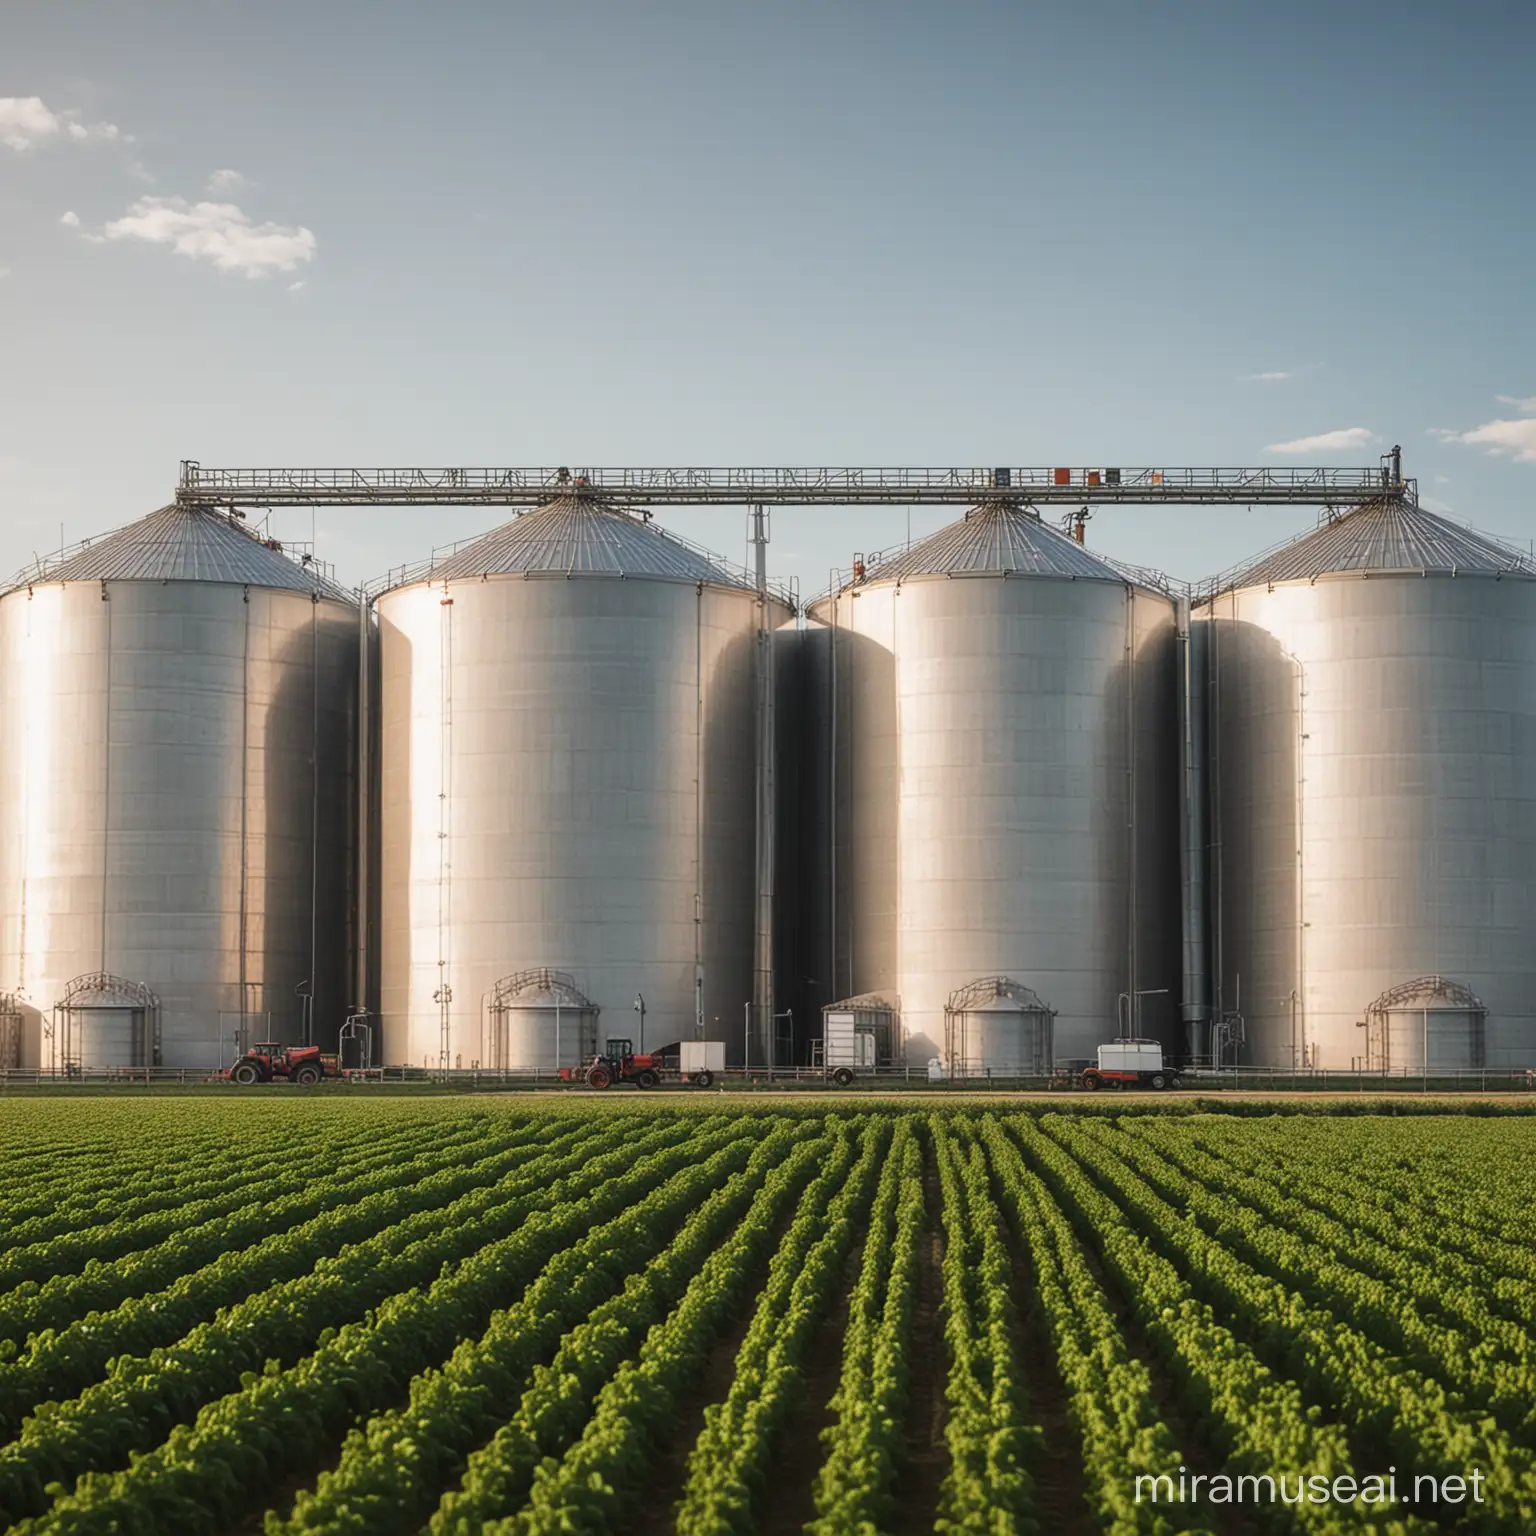 Silo Biz, the innovative fusion of modern agriculture and technology within Agricultural Cooperatives. Discover how this integration is revolutionizing the industry by optimizing supplies and services for better efficiency and productivity. Stay tuned to explore the future of farming with Silo Biz